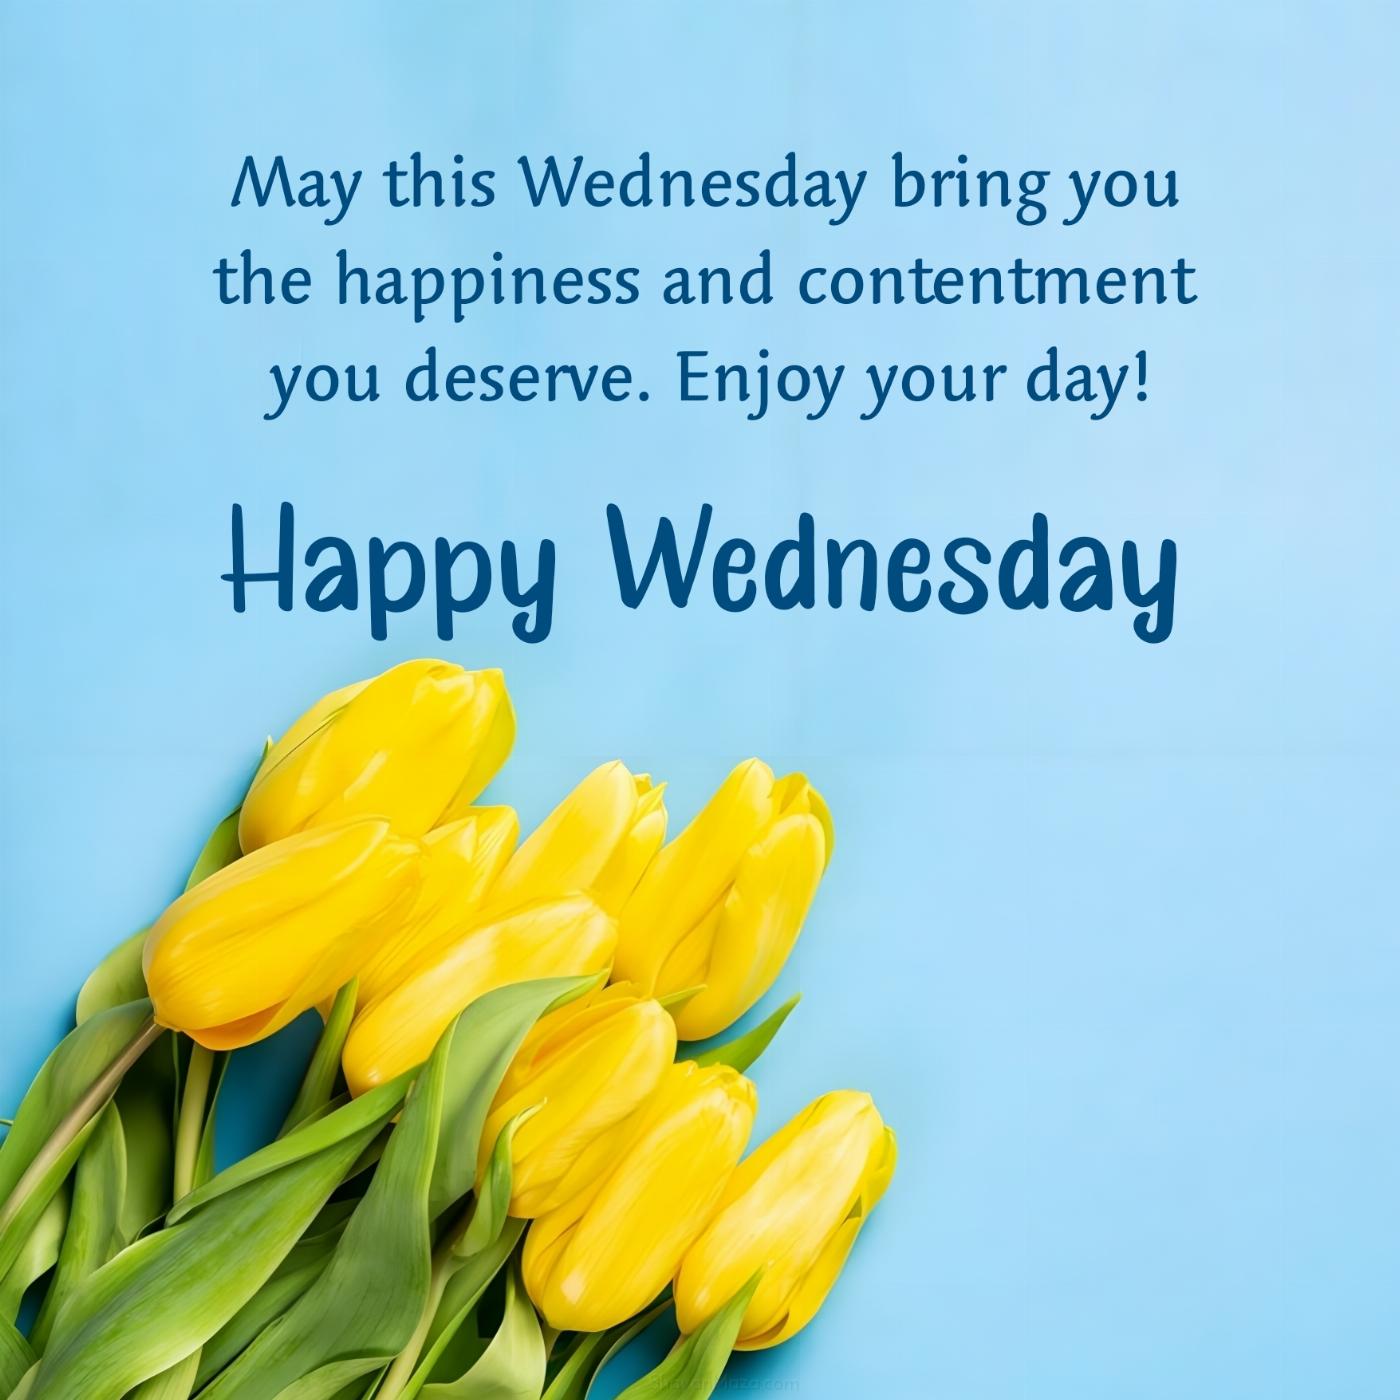 May this Wednesday bring you the happiness and contentment